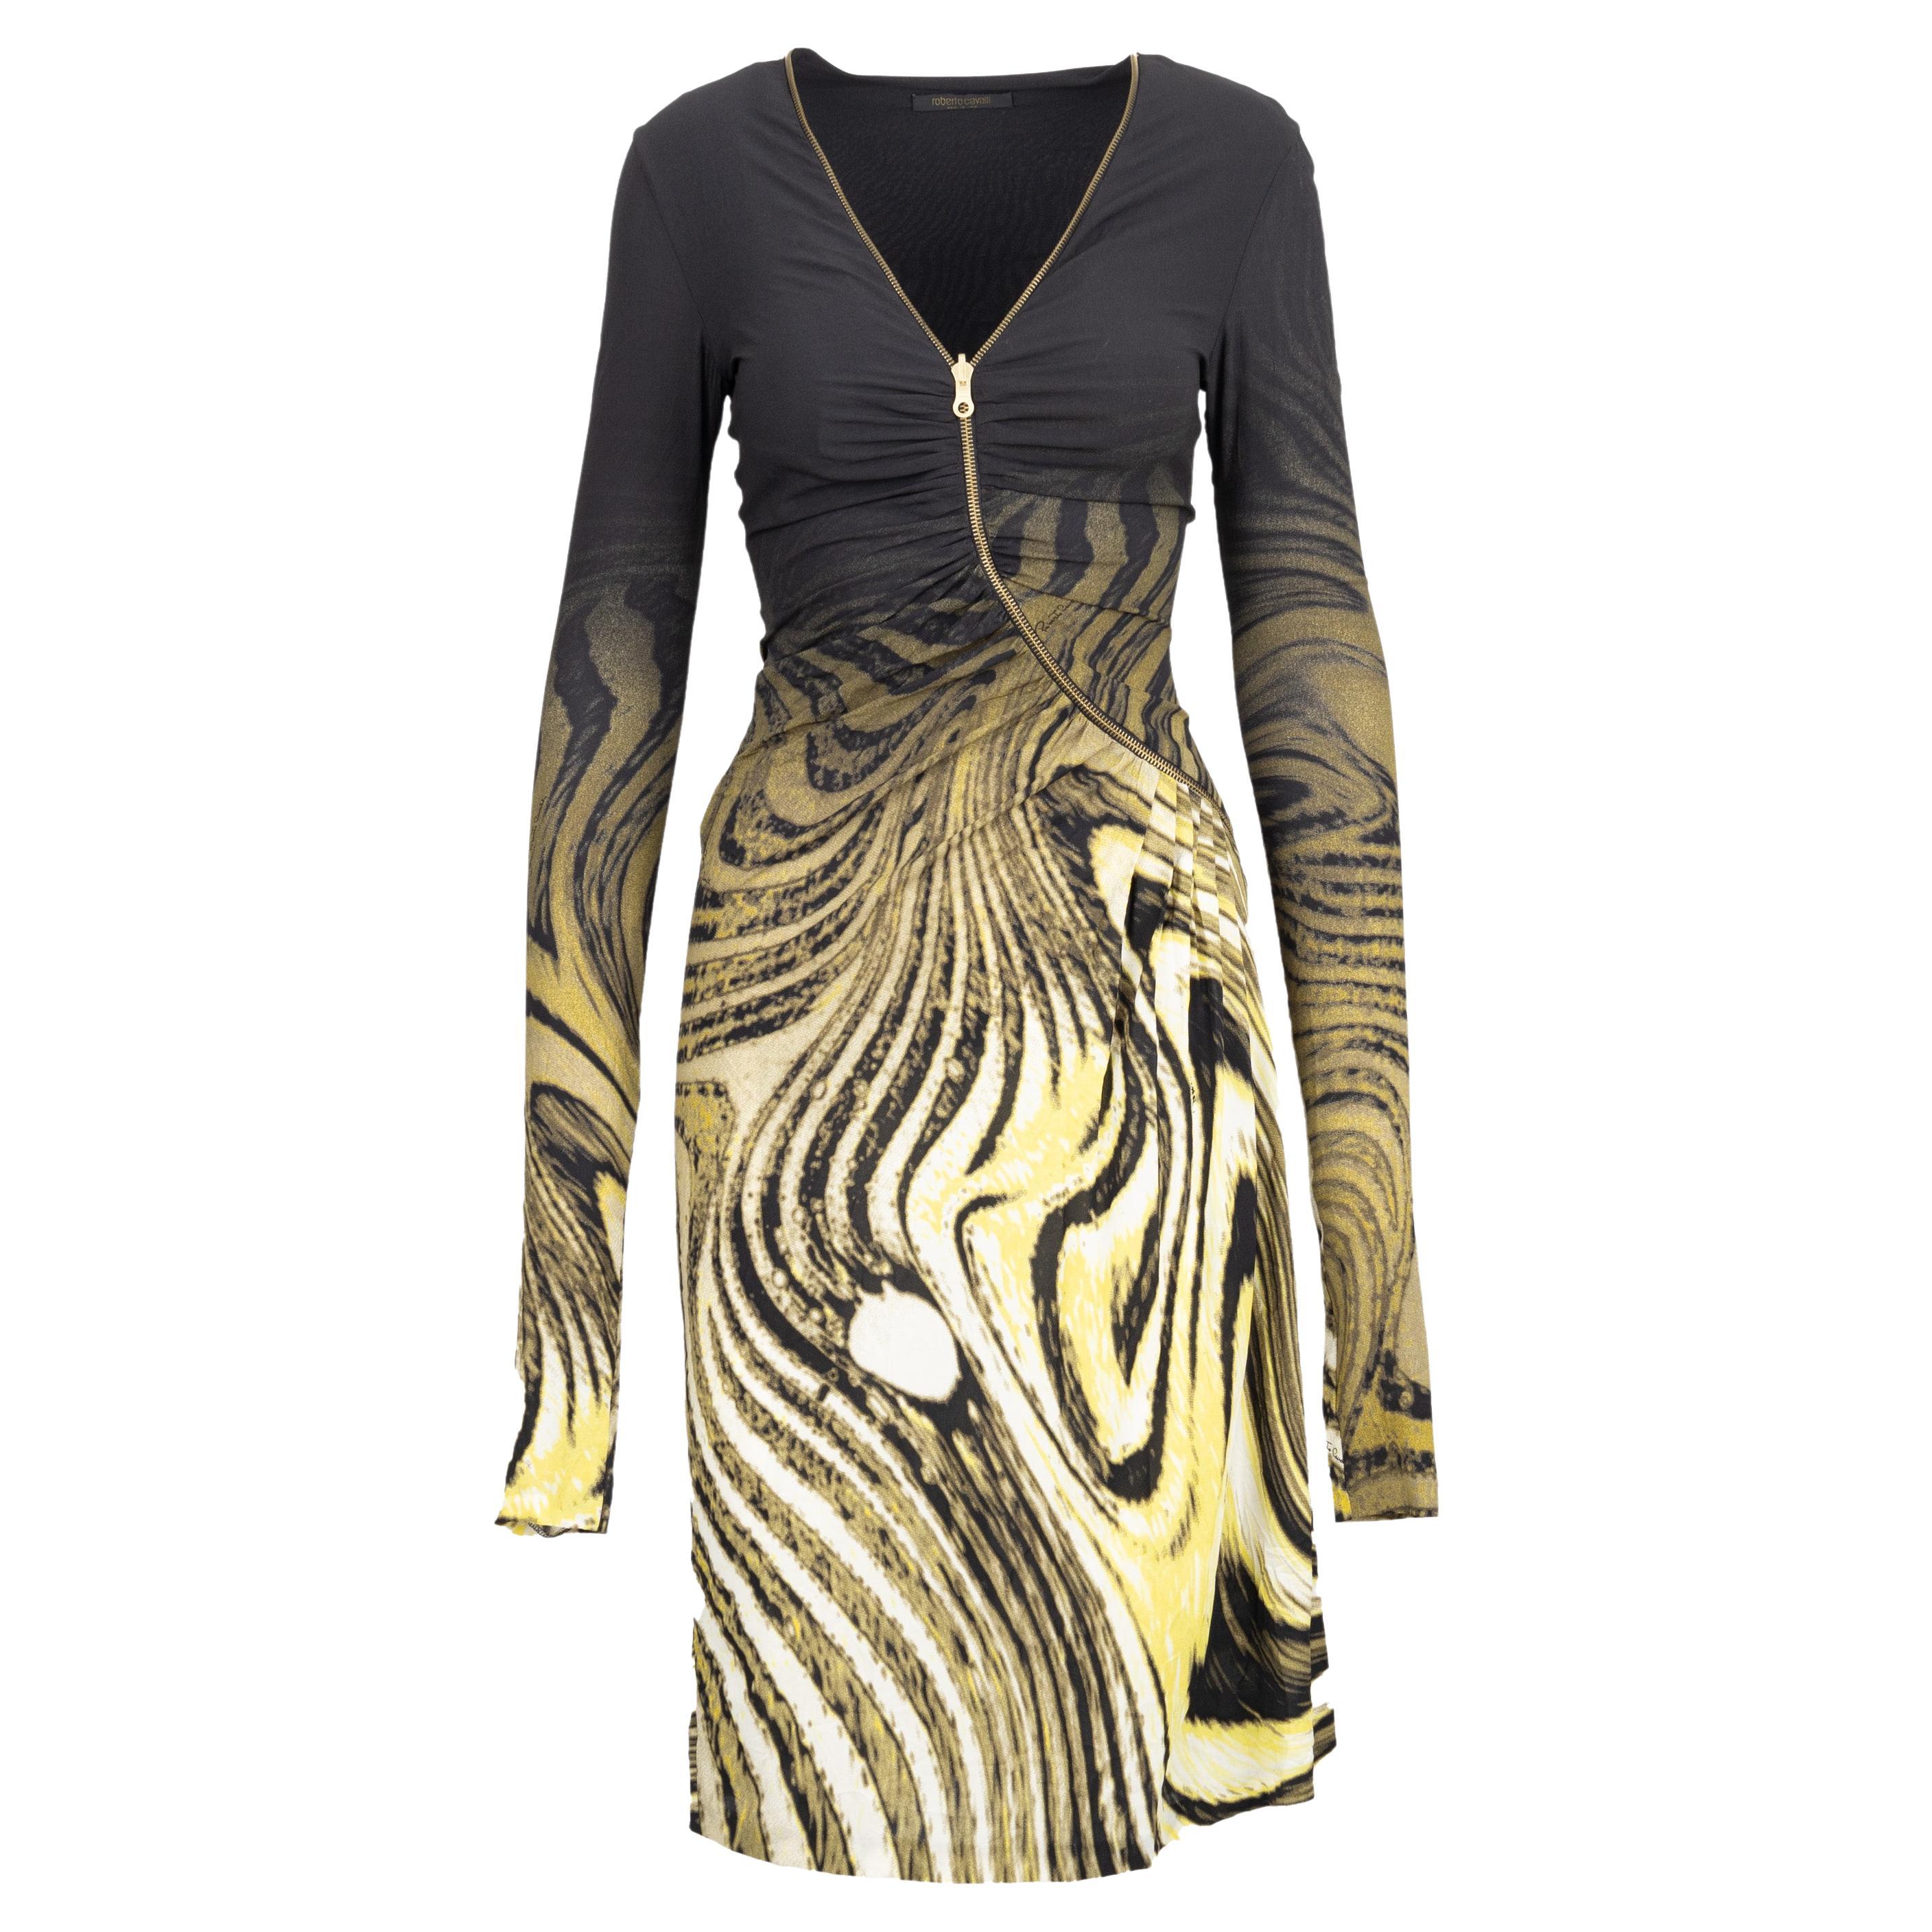 Roberto Cavalli Animalier Print Dress with Front Zipper For Sale